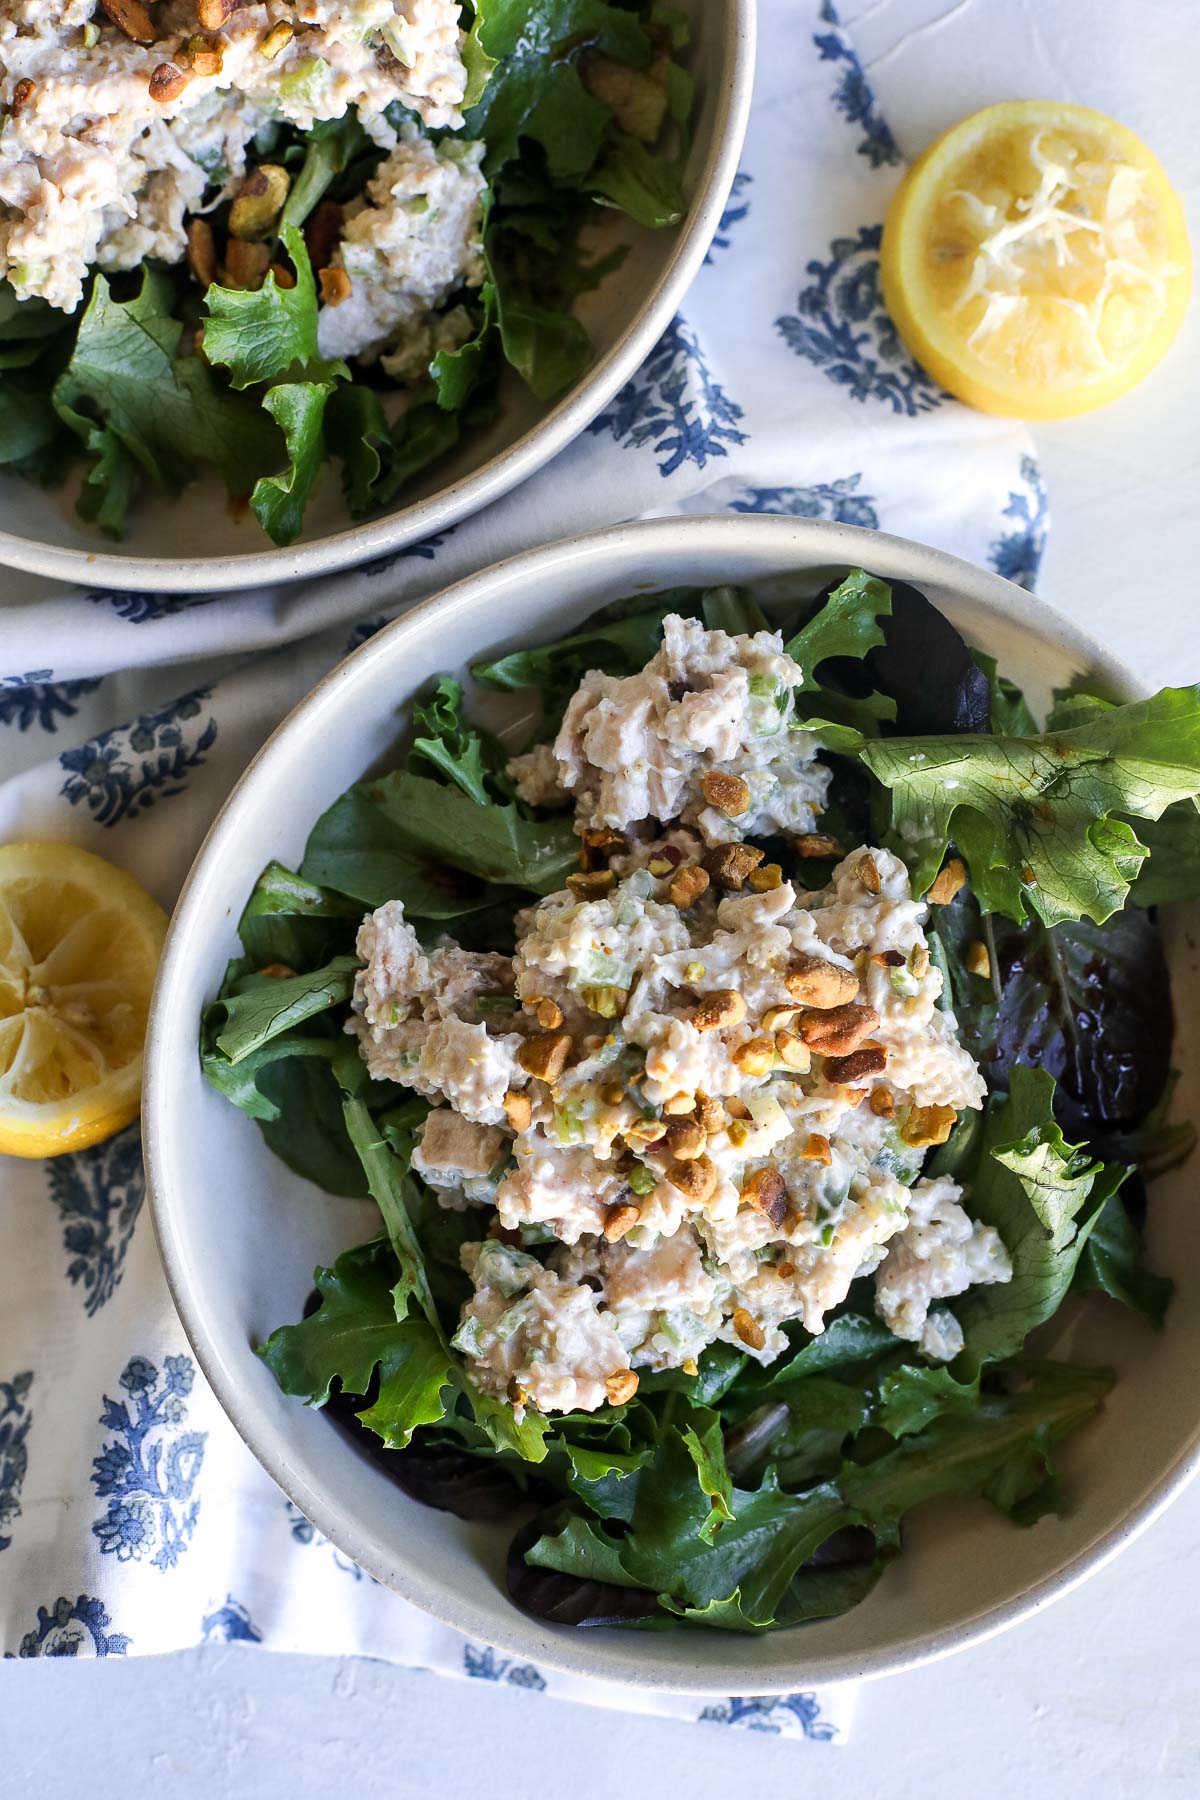 Refresh your mealtime with our Lemon Quinoa Chicken Salad recipe! Packed with flavor and protein, it's a delicious and nutritious choice.